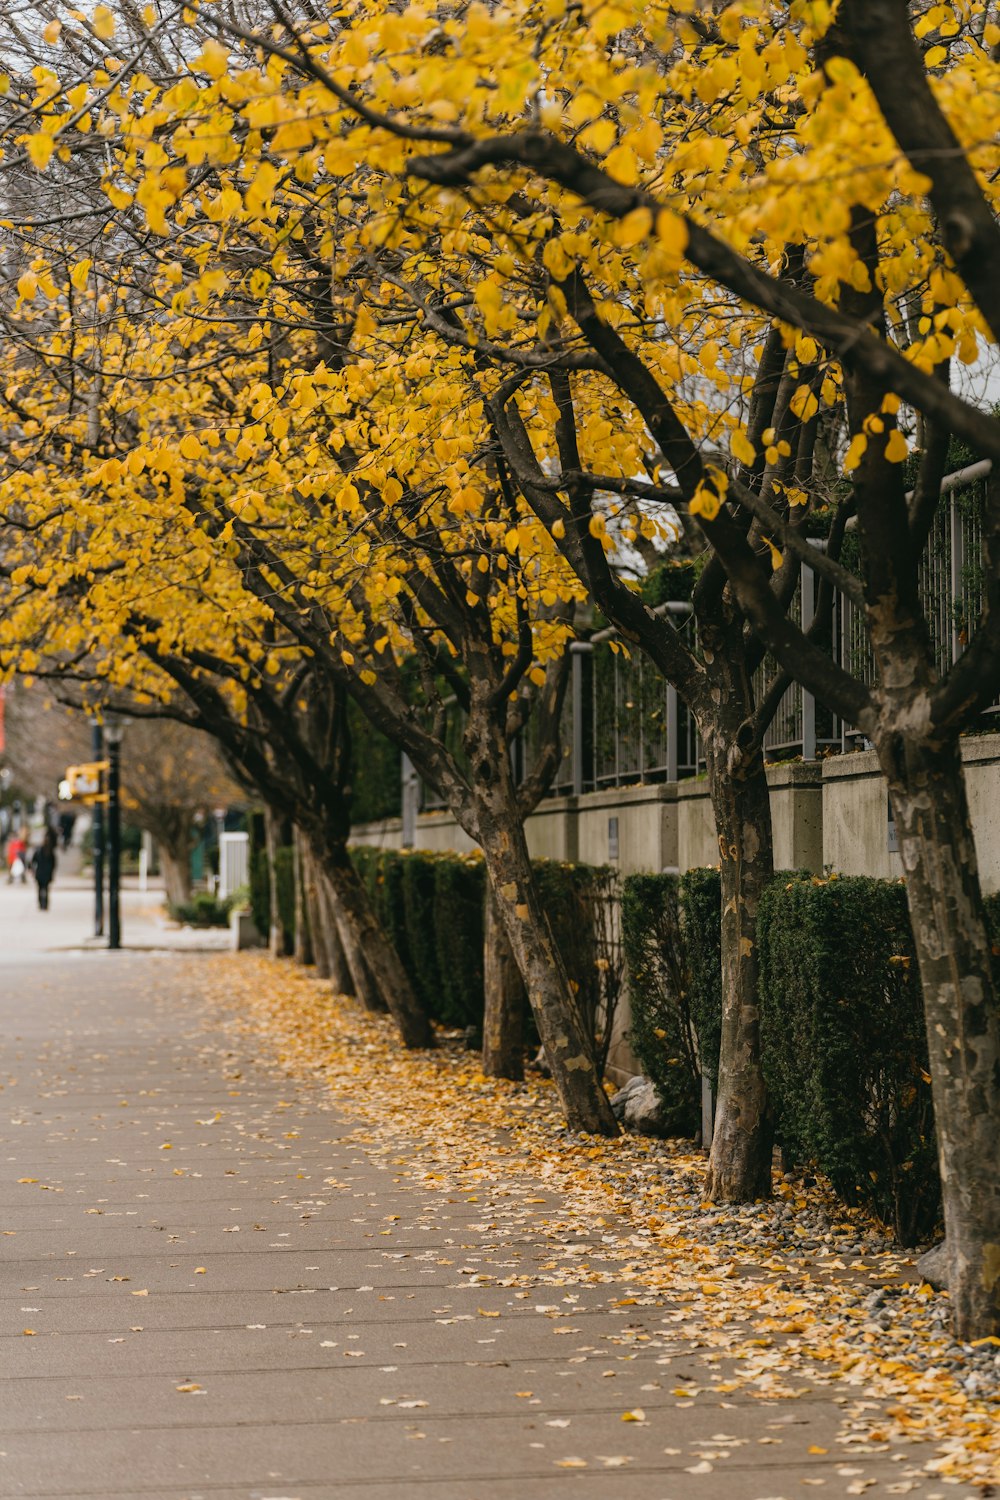 a row of trees with yellow leaves on the ground